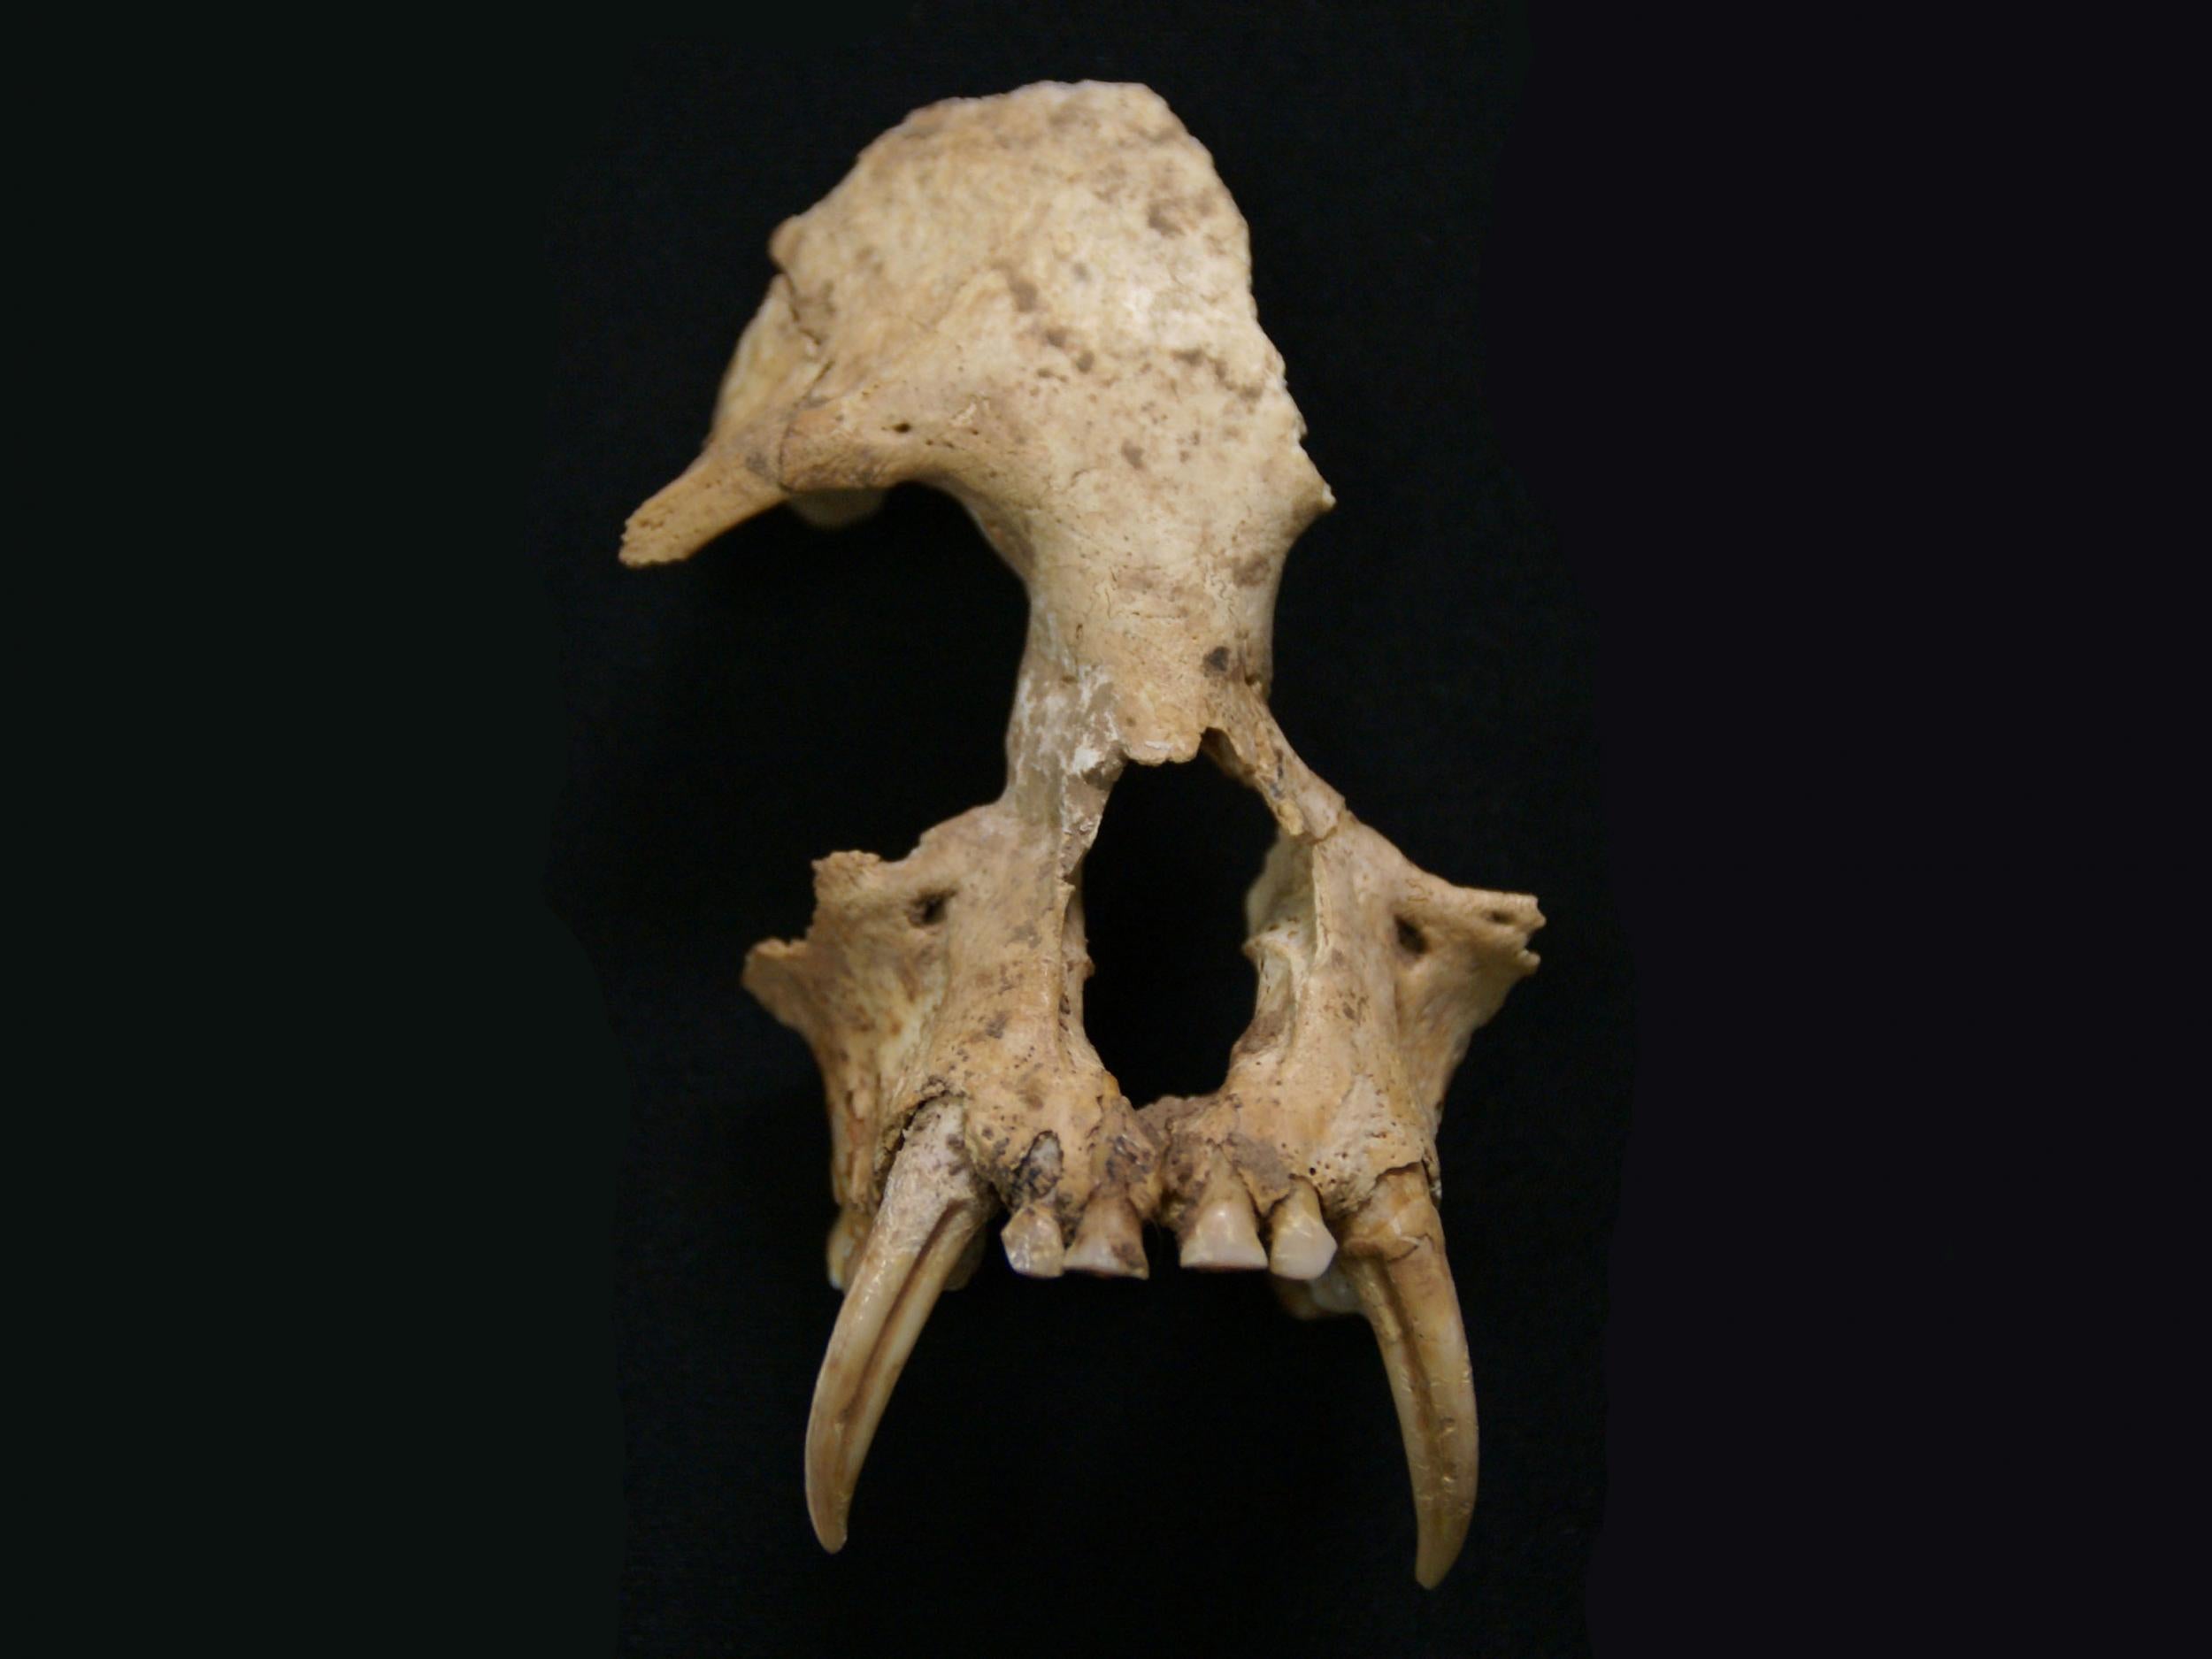 Skull of Junzi imperialis, a newly discovered gibbon species found in a grave in China